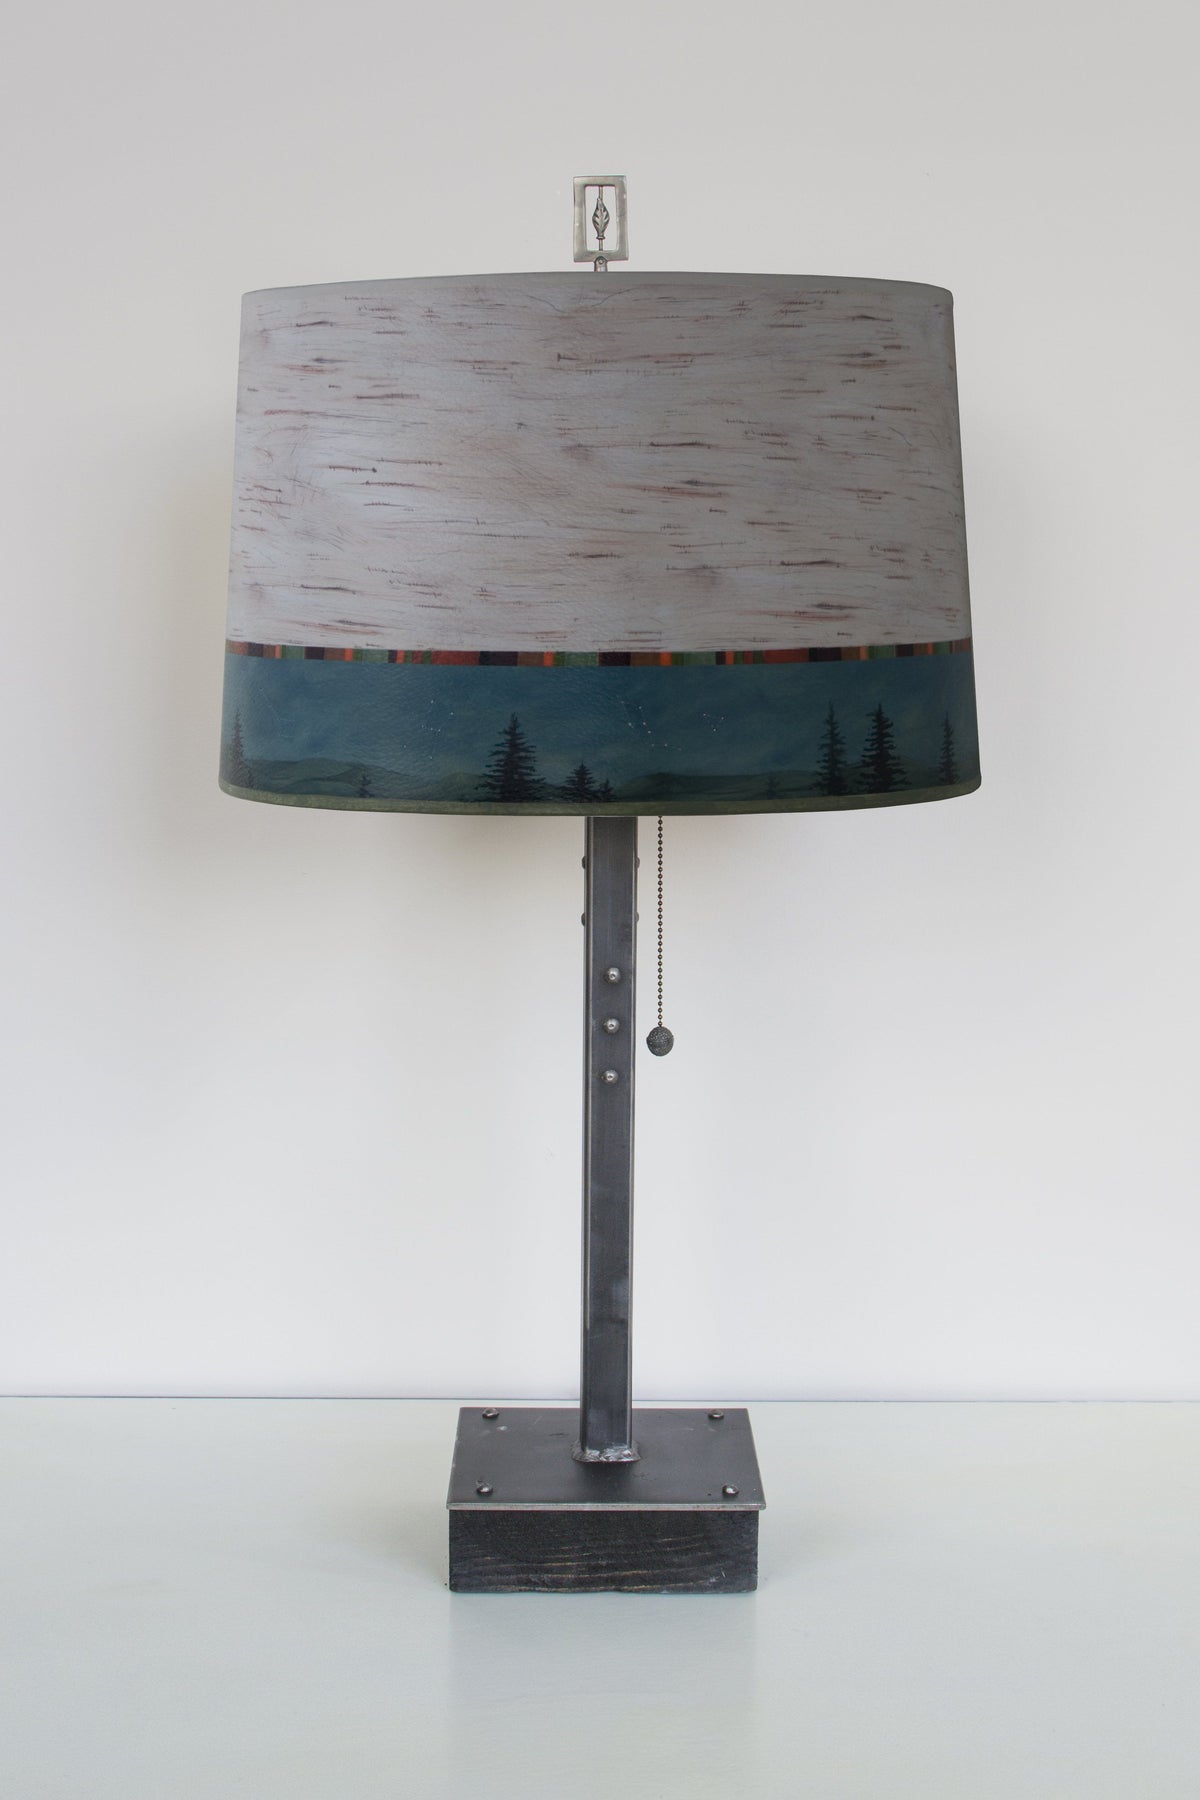 Janna Ugone &amp; Co Table Lamps Steel Table Lamp on Wood with Large Drum Shade in Birch Midnight